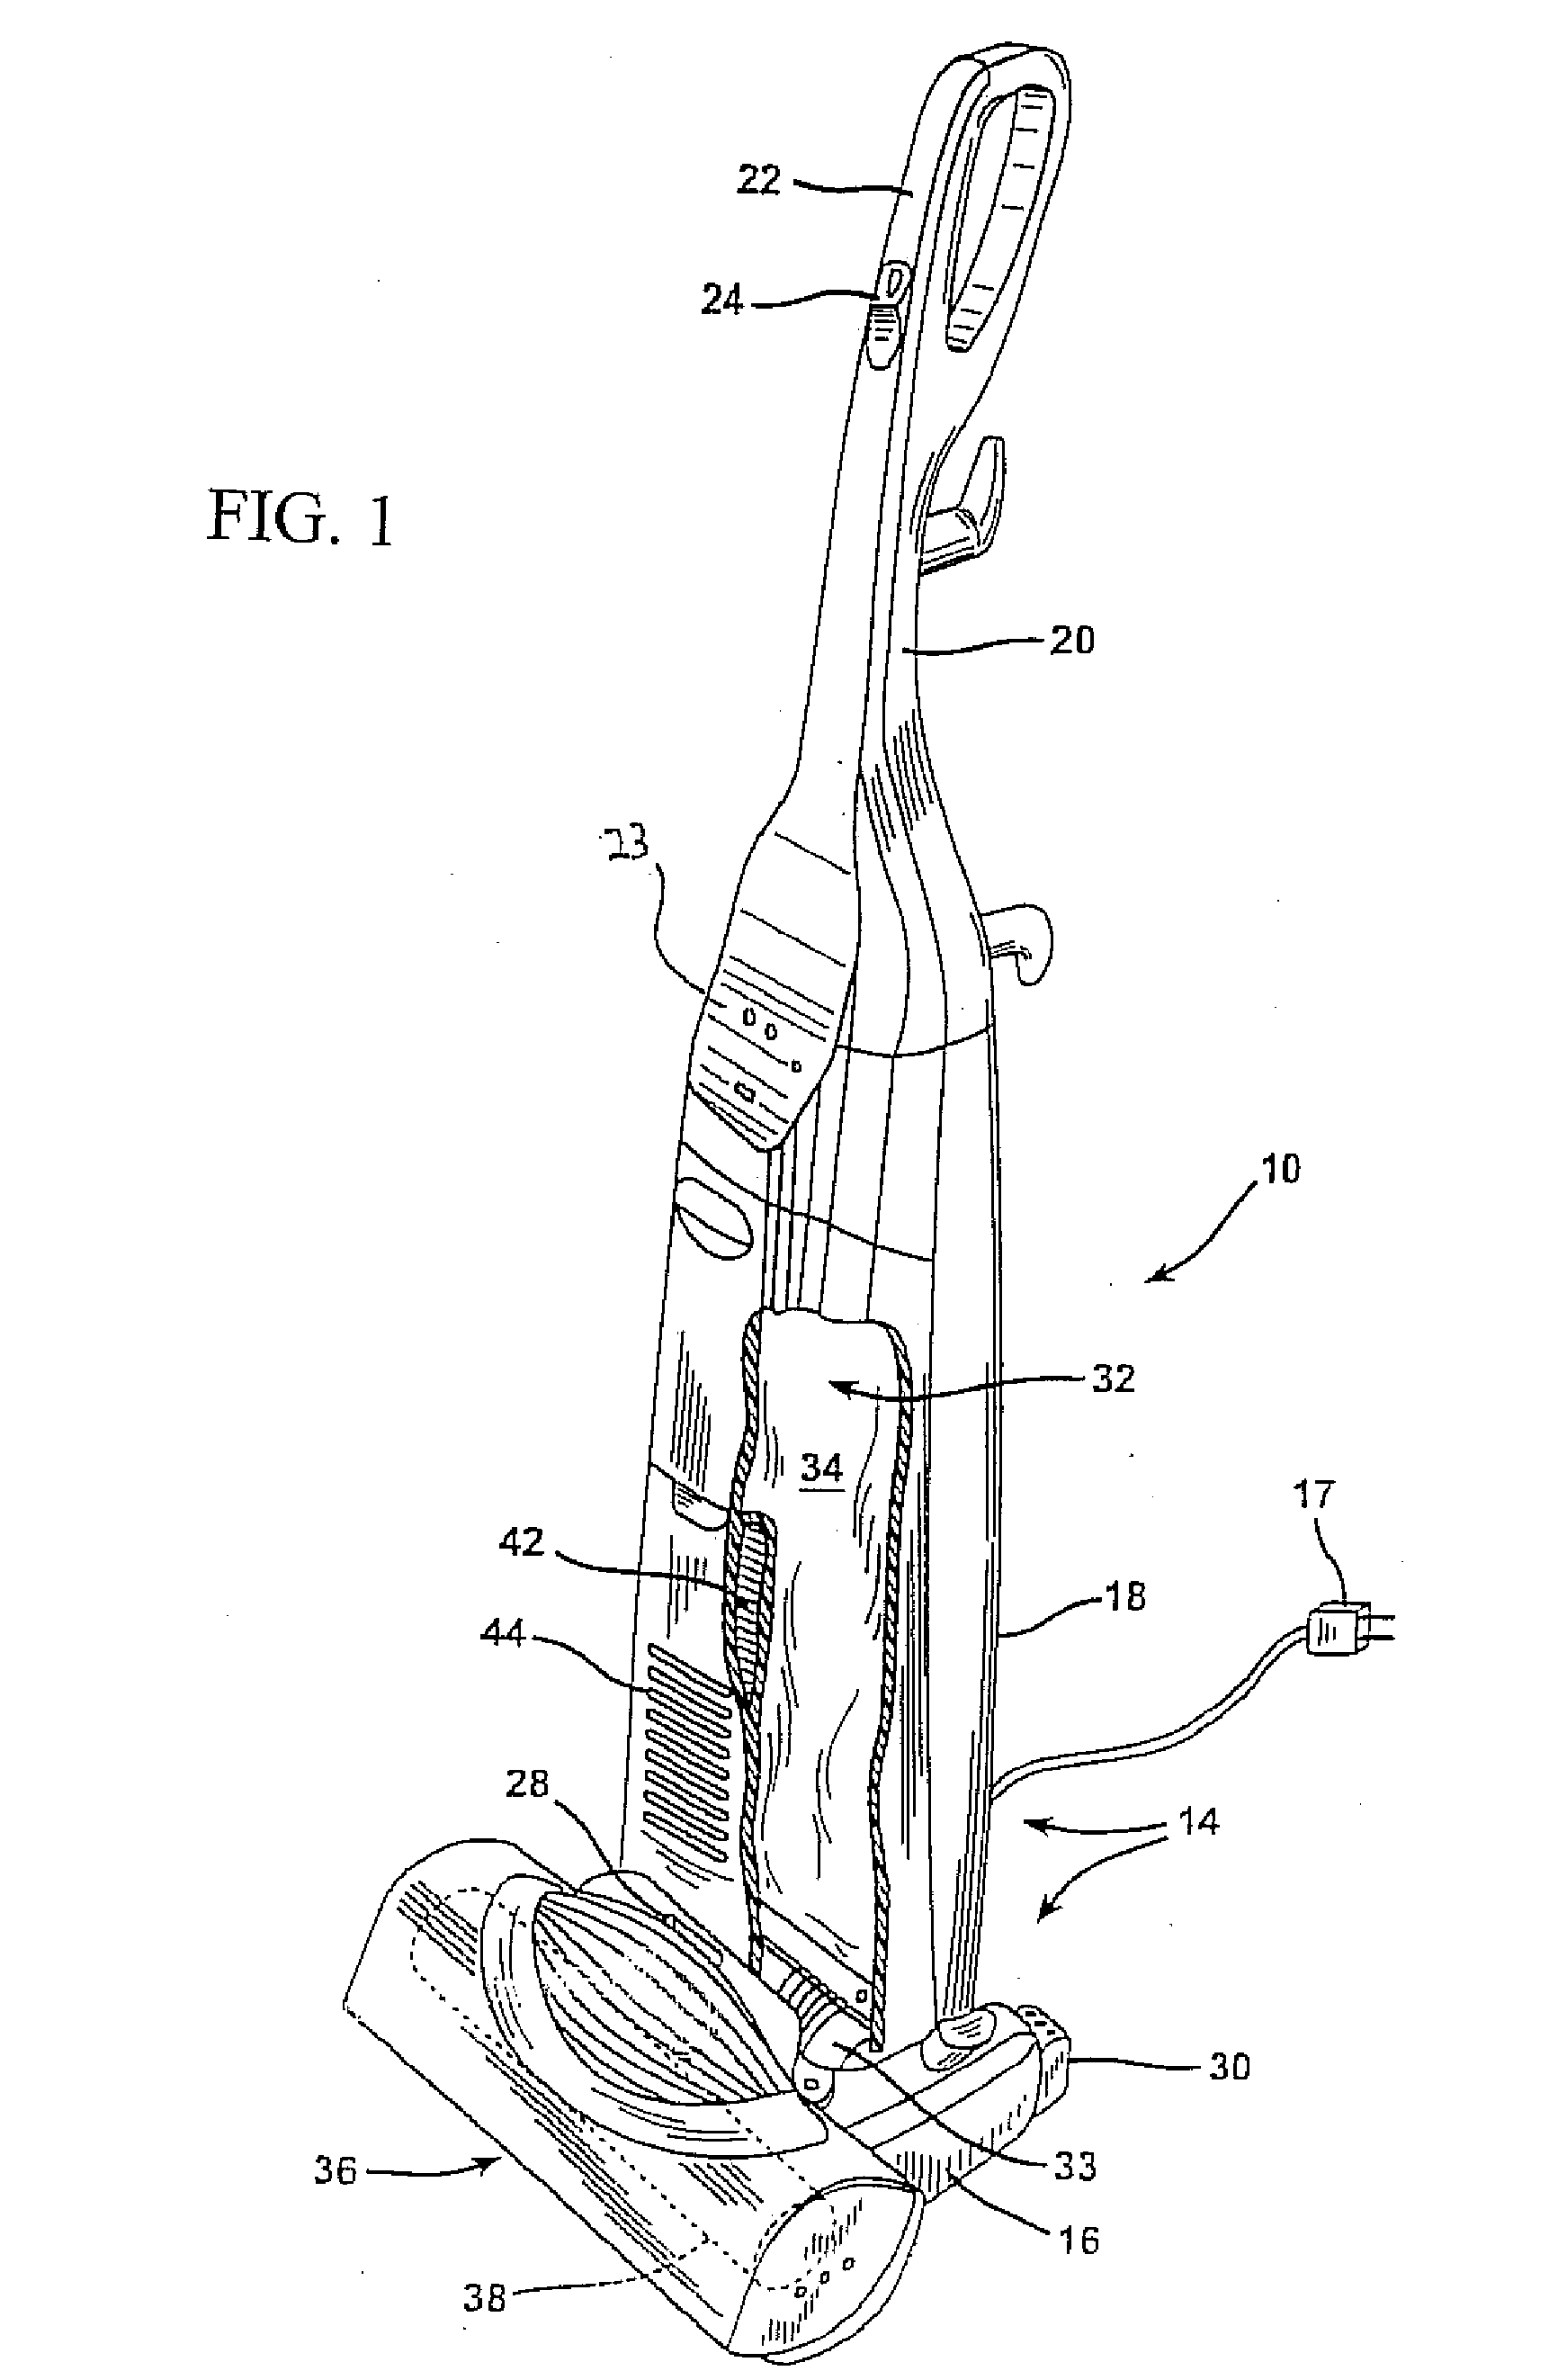 Self-cleaning filter arrangement with activation signal for floor care apparatus